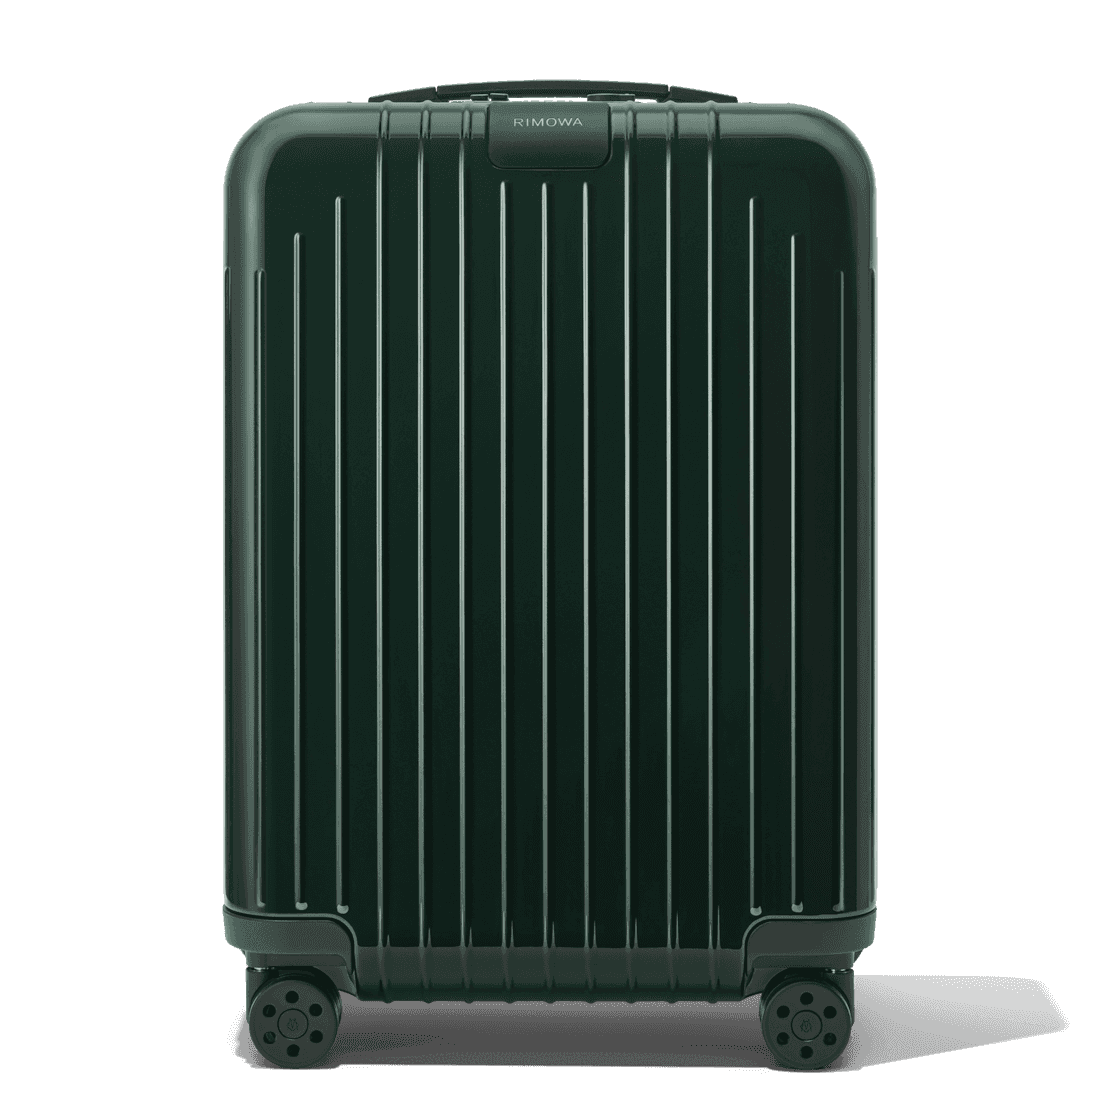 RIMOWA Essential Lite Cabin Carry-On Suitcase in Green Gloss - Polycarbonate - 21,7x15,8x9,1